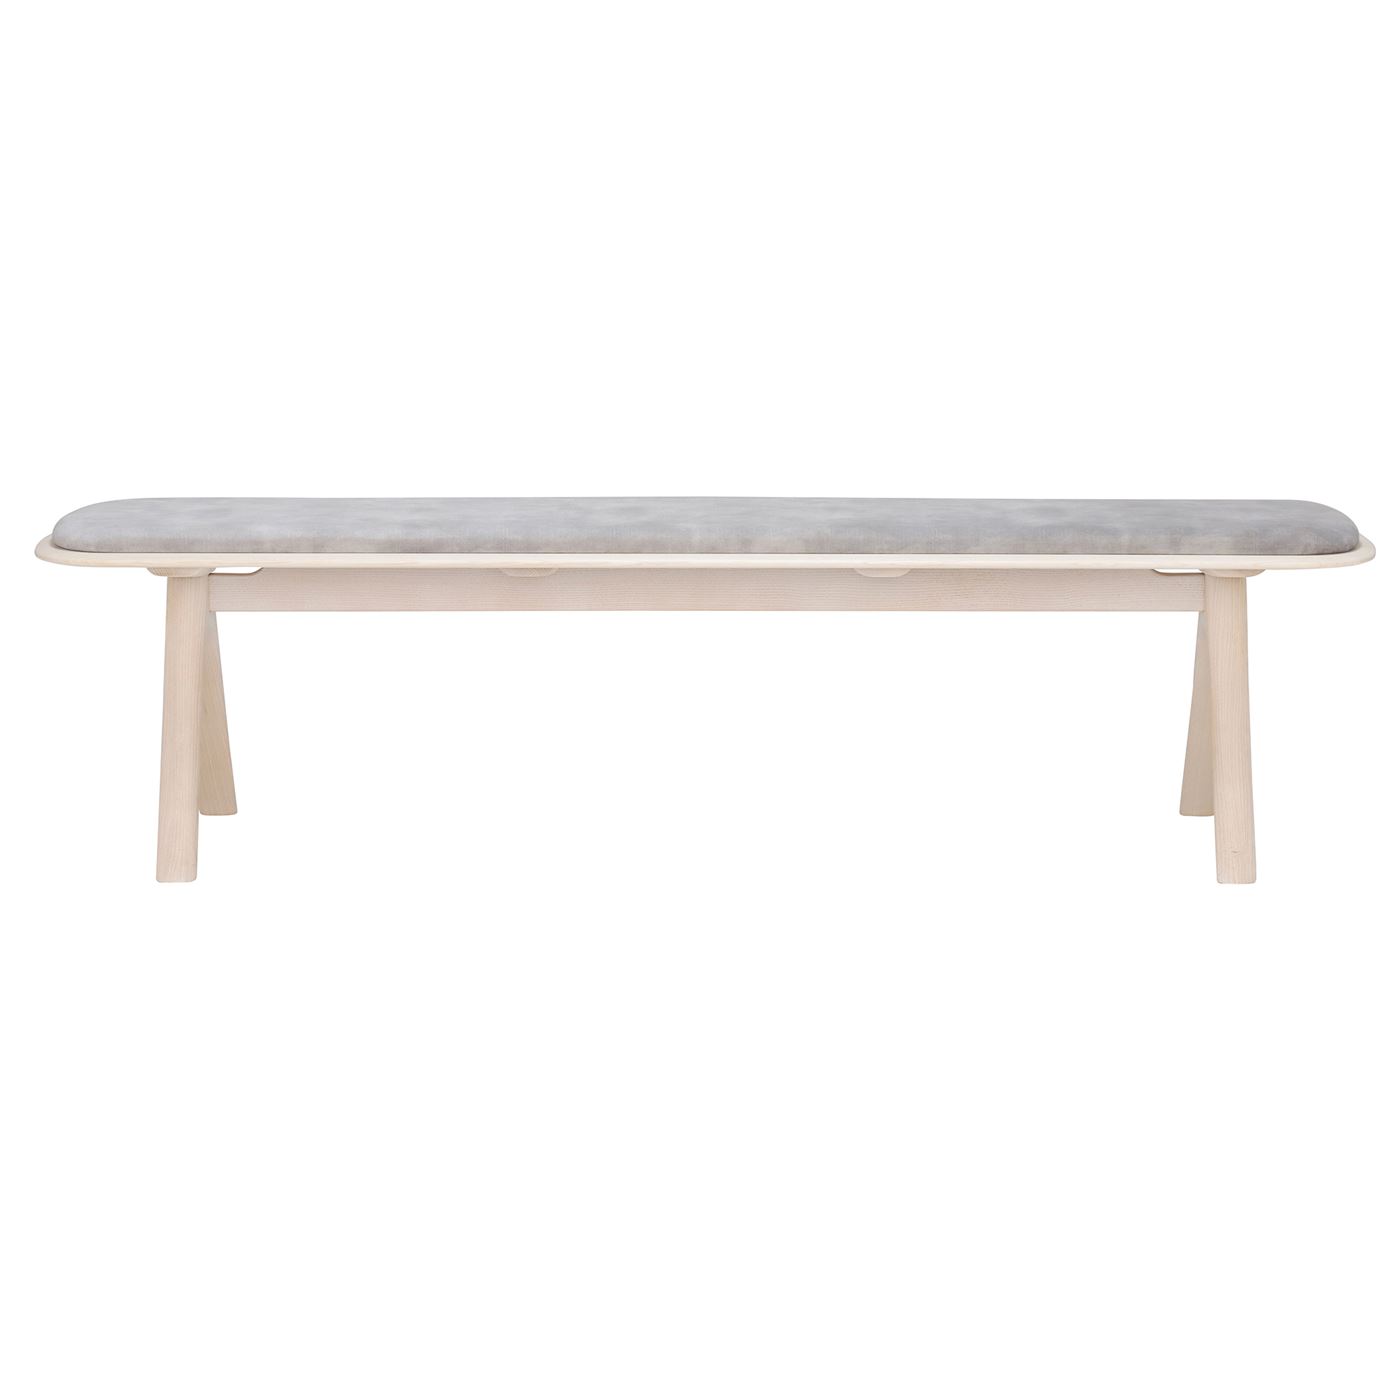 Ercol Corso Upholstered Bench, Neutral Wood | Barker & Stonehouse